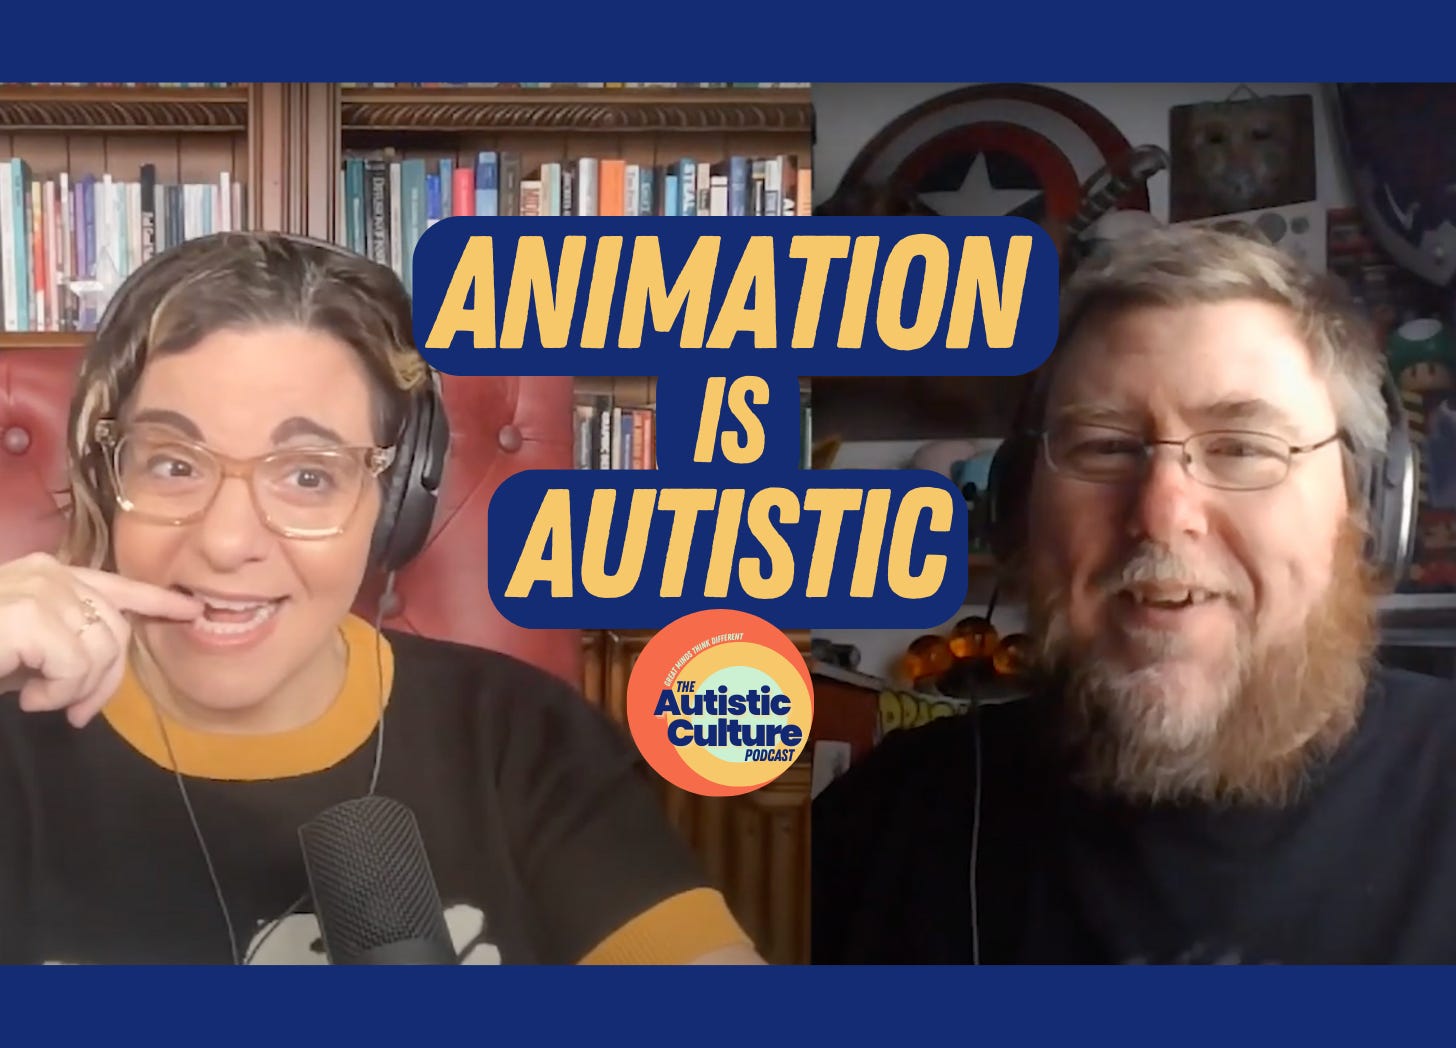 Listen to Autistic podcast hosts discuss: Animation is Autistic. Autism podcast | Join us as we dive into a world filled with Autistic characters, Autistic actors, and Autistic cartoons based on Autistic scripting and echolalia!